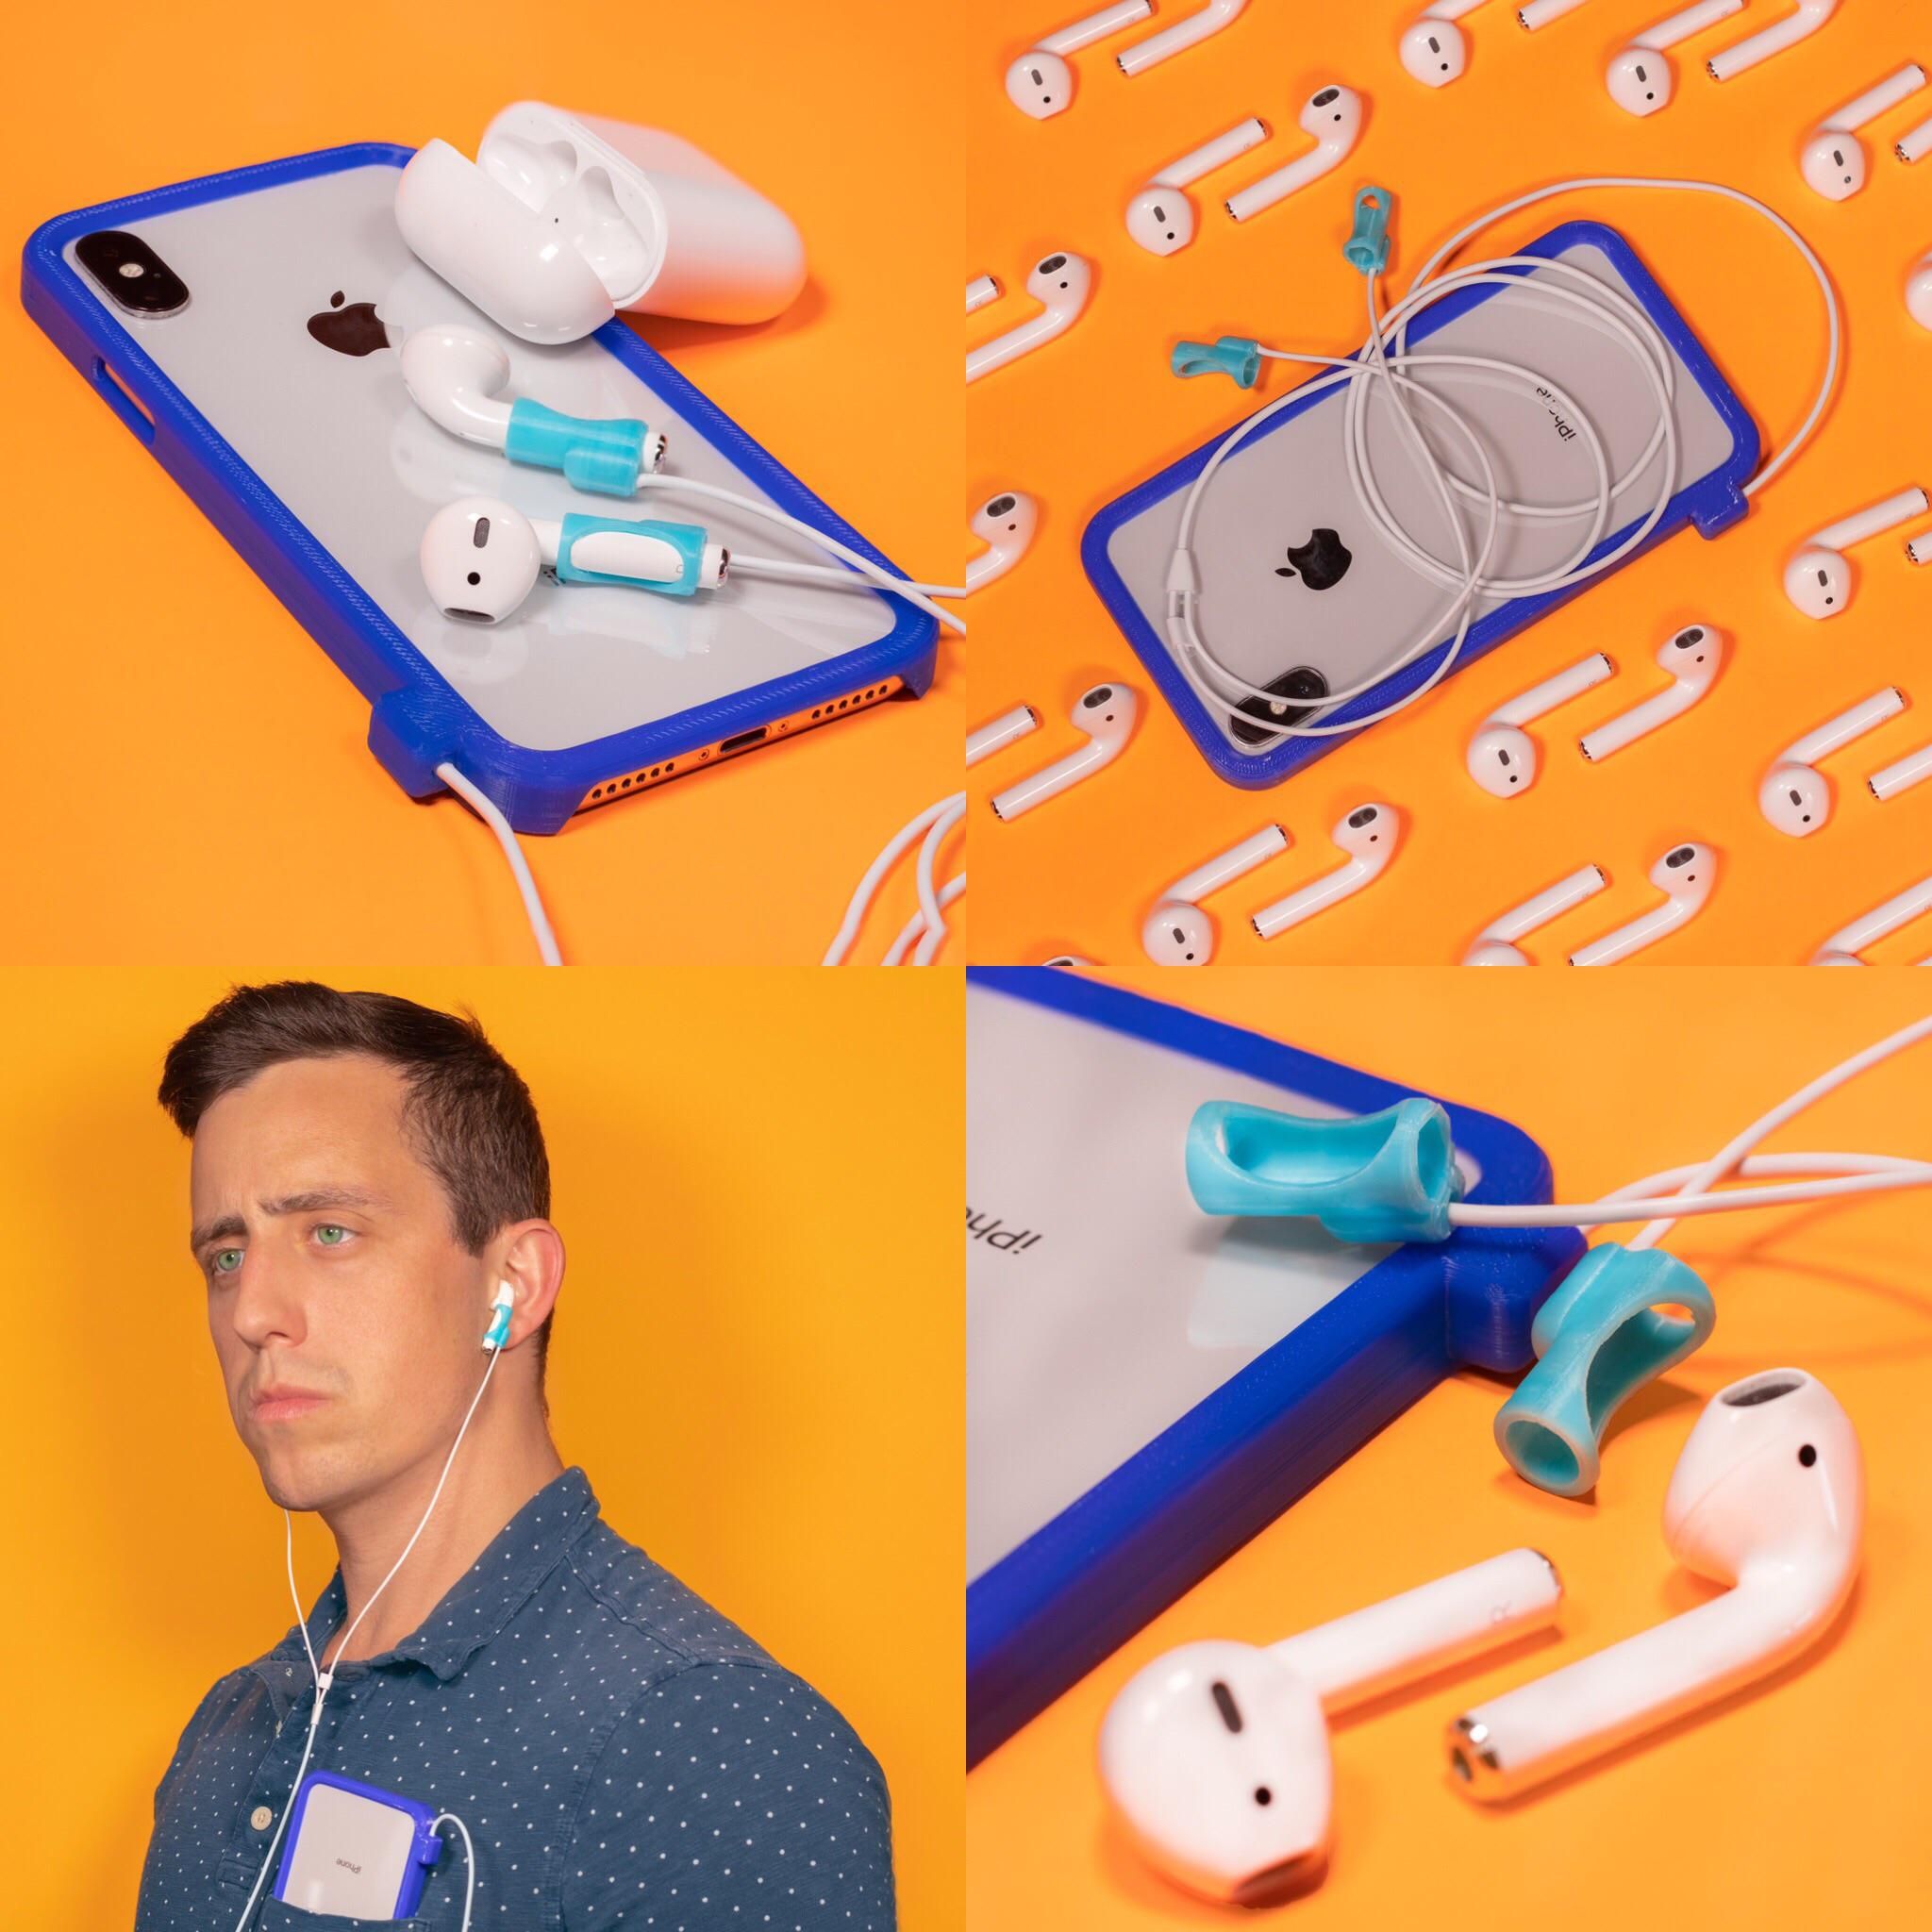 I was tired of always losing my AirPods, so I invented the TetherPods to always keep them attached to a case.